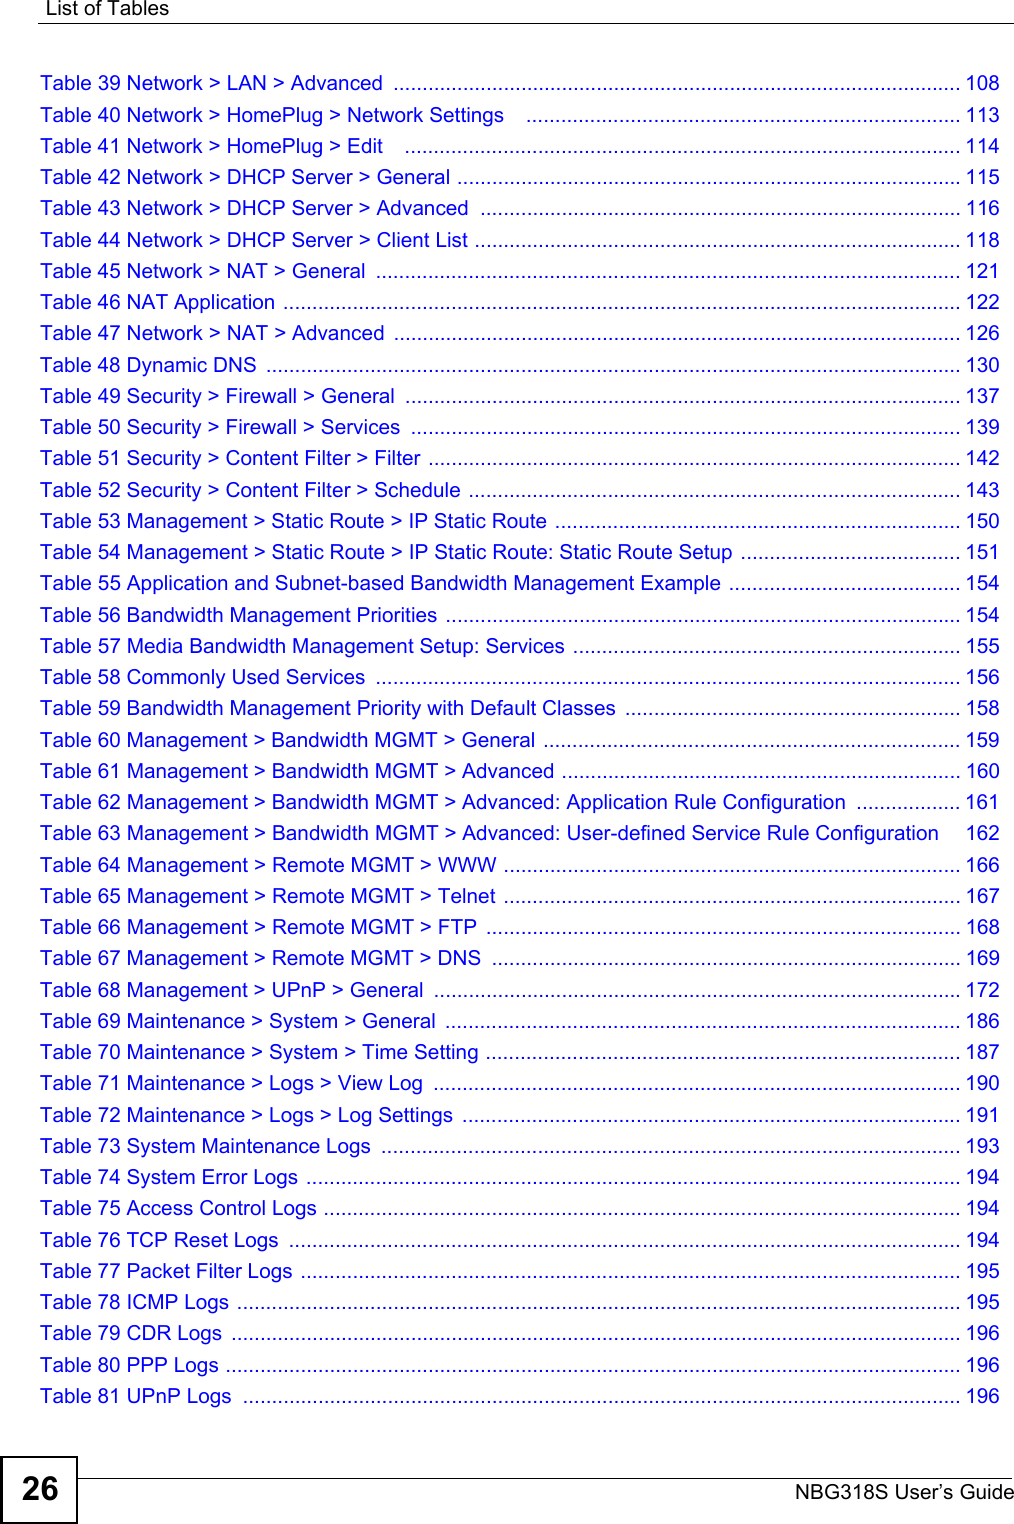 List of TablesNBG318S User’s Guide26Table 39 Network &gt; LAN &gt; Advanced  .................................................................................................. 108Table 40 Network &gt; HomePlug &gt; Network Settings    ........................................................................... 113Table 41 Network &gt; HomePlug &gt; Edit    ................................................................................................ 114Table 42 Network &gt; DHCP Server &gt; General .......................................................................................115Table 43 Network &gt; DHCP Server &gt; Advanced  ................................................................................... 116Table 44 Network &gt; DHCP Server &gt; Client List .................................................................................... 118Table 45 Network &gt; NAT &gt; General  ..................................................................................................... 121Table 46 NAT Application ..................................................................................................................... 122Table 47 Network &gt; NAT &gt; Advanced .................................................................................................. 126Table 48 Dynamic DNS  ........................................................................................................................ 130Table 49 Security &gt; Firewall &gt; General ................................................................................................ 137Table 50 Security &gt; Firewall &gt; Services  ............................................................................................... 139Table 51 Security &gt; Content Filter &gt; Filter ............................................................................................ 142Table 52 Security &gt; Content Filter &gt; Schedule ..................................................................................... 143Table 53 Management &gt; Static Route &gt; IP Static Route ...................................................................... 150Table 54 Management &gt; Static Route &gt; IP Static Route: Static Route Setup ...................................... 151Table 55 Application and Subnet-based Bandwidth Management Example ........................................ 154Table 56 Bandwidth Management Priorities ......................................................................................... 154Table 57 Media Bandwidth Management Setup: Services ................................................................... 155Table 58 Commonly Used Services  ..................................................................................................... 156Table 59 Bandwidth Management Priority with Default Classes  .......................................................... 158Table 60 Management &gt; Bandwidth MGMT &gt; General ........................................................................ 159Table 61 Management &gt; Bandwidth MGMT &gt; Advanced ..................................................................... 160Table 62 Management &gt; Bandwidth MGMT &gt; Advanced: Application Rule Configuration  .................. 161Table 63 Management &gt; Bandwidth MGMT &gt; Advanced: User-defined Service Rule Configuration    162Table 64 Management &gt; Remote MGMT &gt; WWW ............................................................................... 166Table 65 Management &gt; Remote MGMT &gt; Telnet ............................................................................... 167Table 66 Management &gt; Remote MGMT &gt; FTP  .................................................................................. 168Table 67 Management &gt; Remote MGMT &gt; DNS  ................................................................................. 169Table 68 Management &gt; UPnP &gt; General  ...........................................................................................172Table 69 Maintenance &gt; System &gt; General  ......................................................................................... 186Table 70 Maintenance &gt; System &gt; Time Setting .................................................................................. 187Table 71 Maintenance &gt; Logs &gt; View Log  ........................................................................................... 190Table 72 Maintenance &gt; Logs &gt; Log Settings  ...................................................................................... 191Table 73 System Maintenance Logs  .................................................................................................... 193Table 74 System Error Logs ................................................................................................................. 194Table 75 Access Control Logs .............................................................................................................. 194Table 76 TCP Reset Logs  .................................................................................................................... 194Table 77 Packet Filter Logs .................................................................................................................. 195Table 78 ICMP Logs ............................................................................................................................. 195Table 79 CDR Logs  .............................................................................................................................. 196Table 80 PPP Logs ............................................................................................................................... 196Table 81 UPnP Logs  ............................................................................................................................ 196